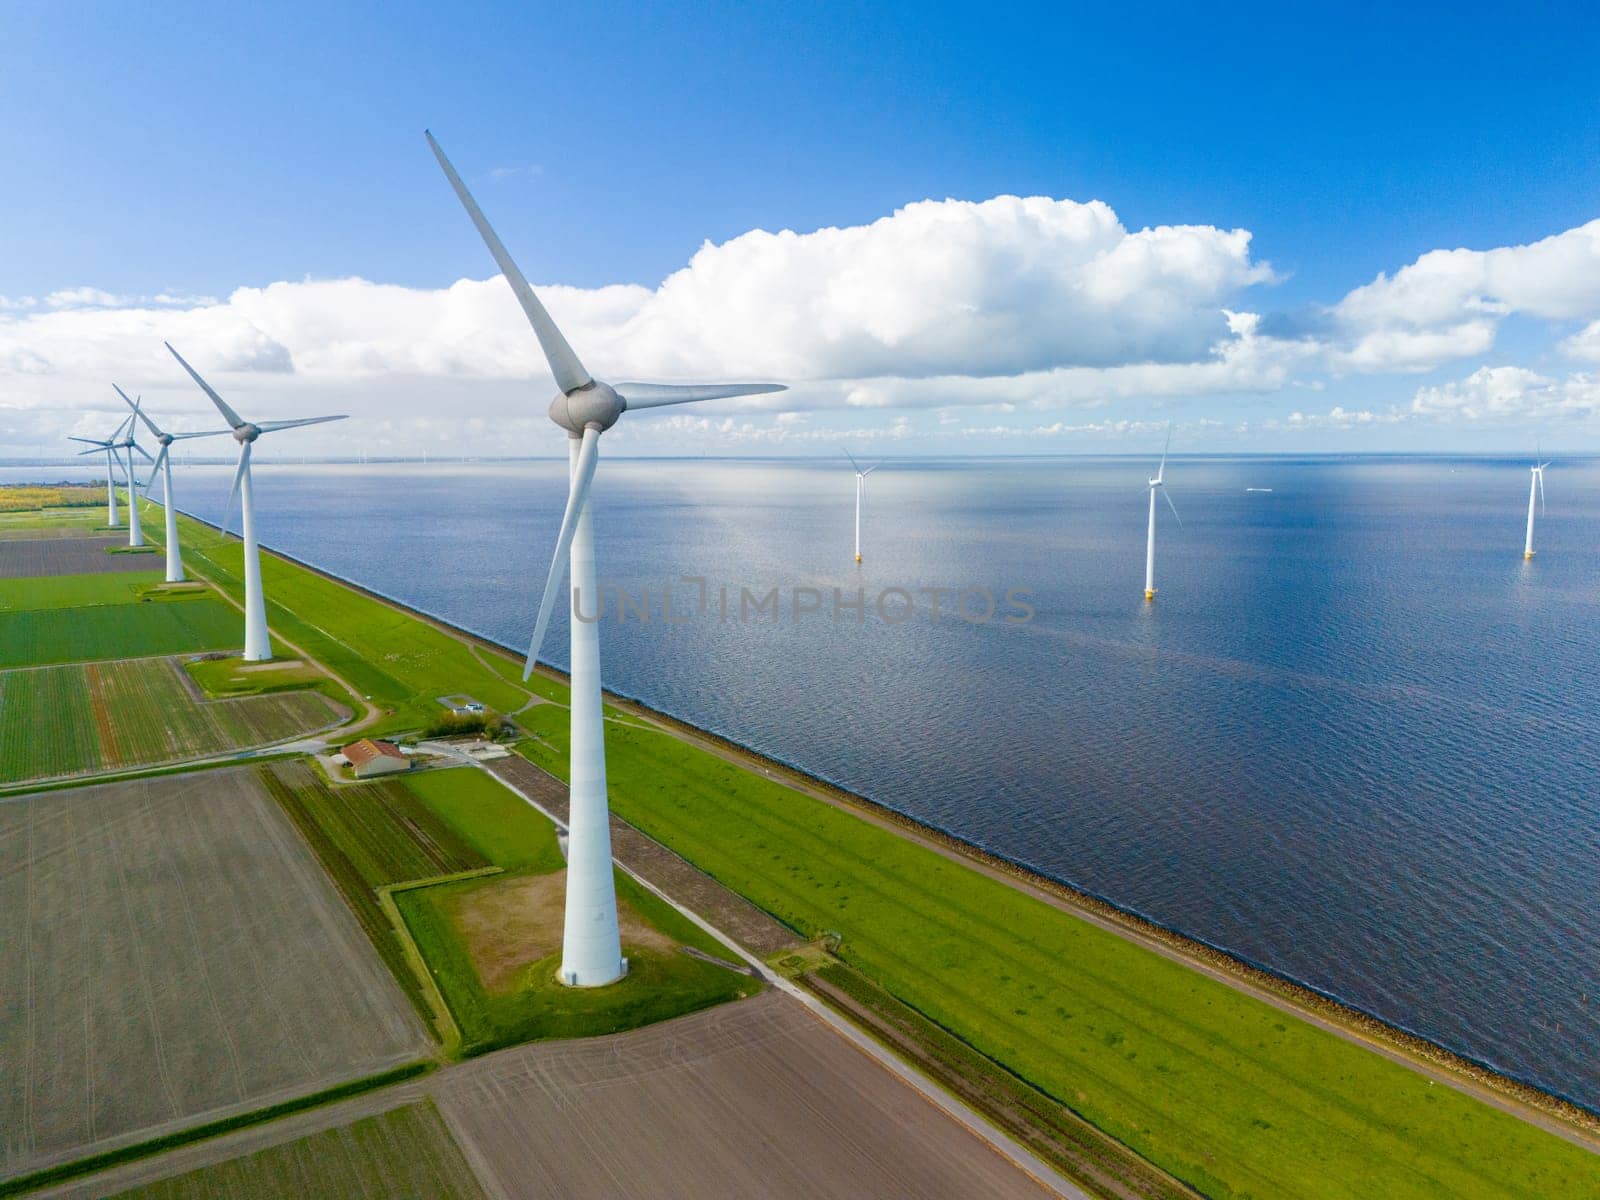 A wind farm generates clean energy in the middle of a vast Dutch lake, with rows of windmill turbines spinning gracefully under the spring sky. Ijsselmeer windmill turbines Noordoostpolder Netherlands